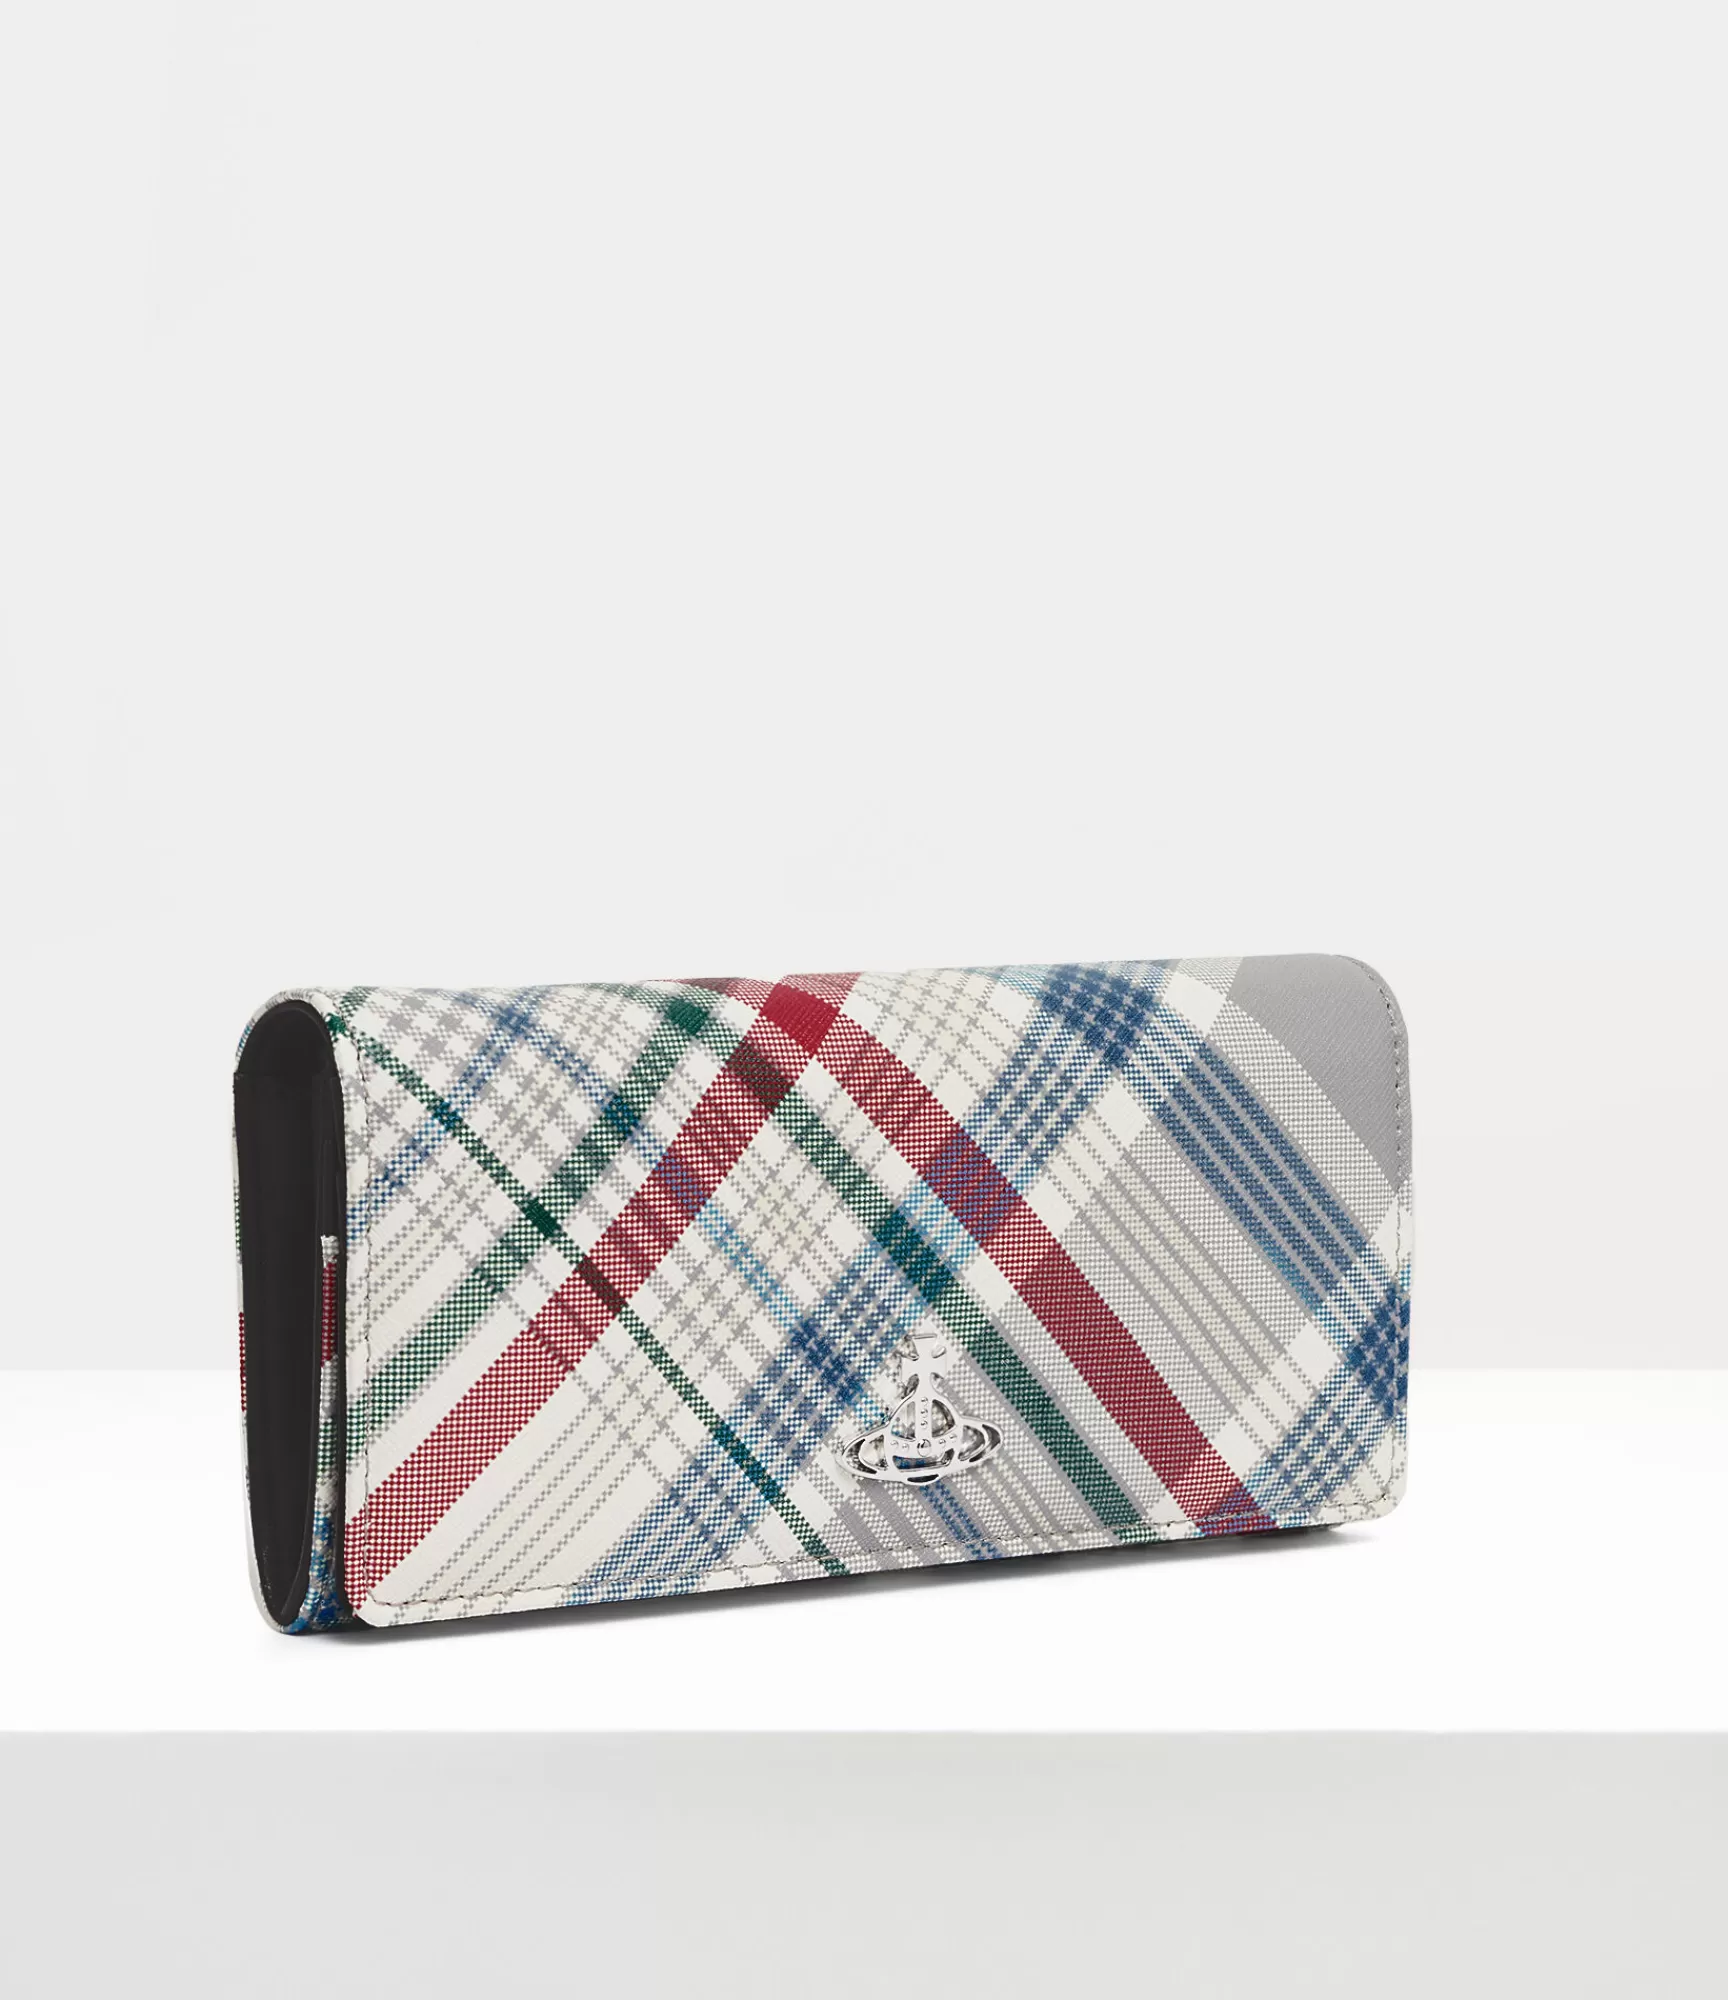 Vivienne Westwood Wallets and Purses*Saffiano print classic credit card wallet Madras Check